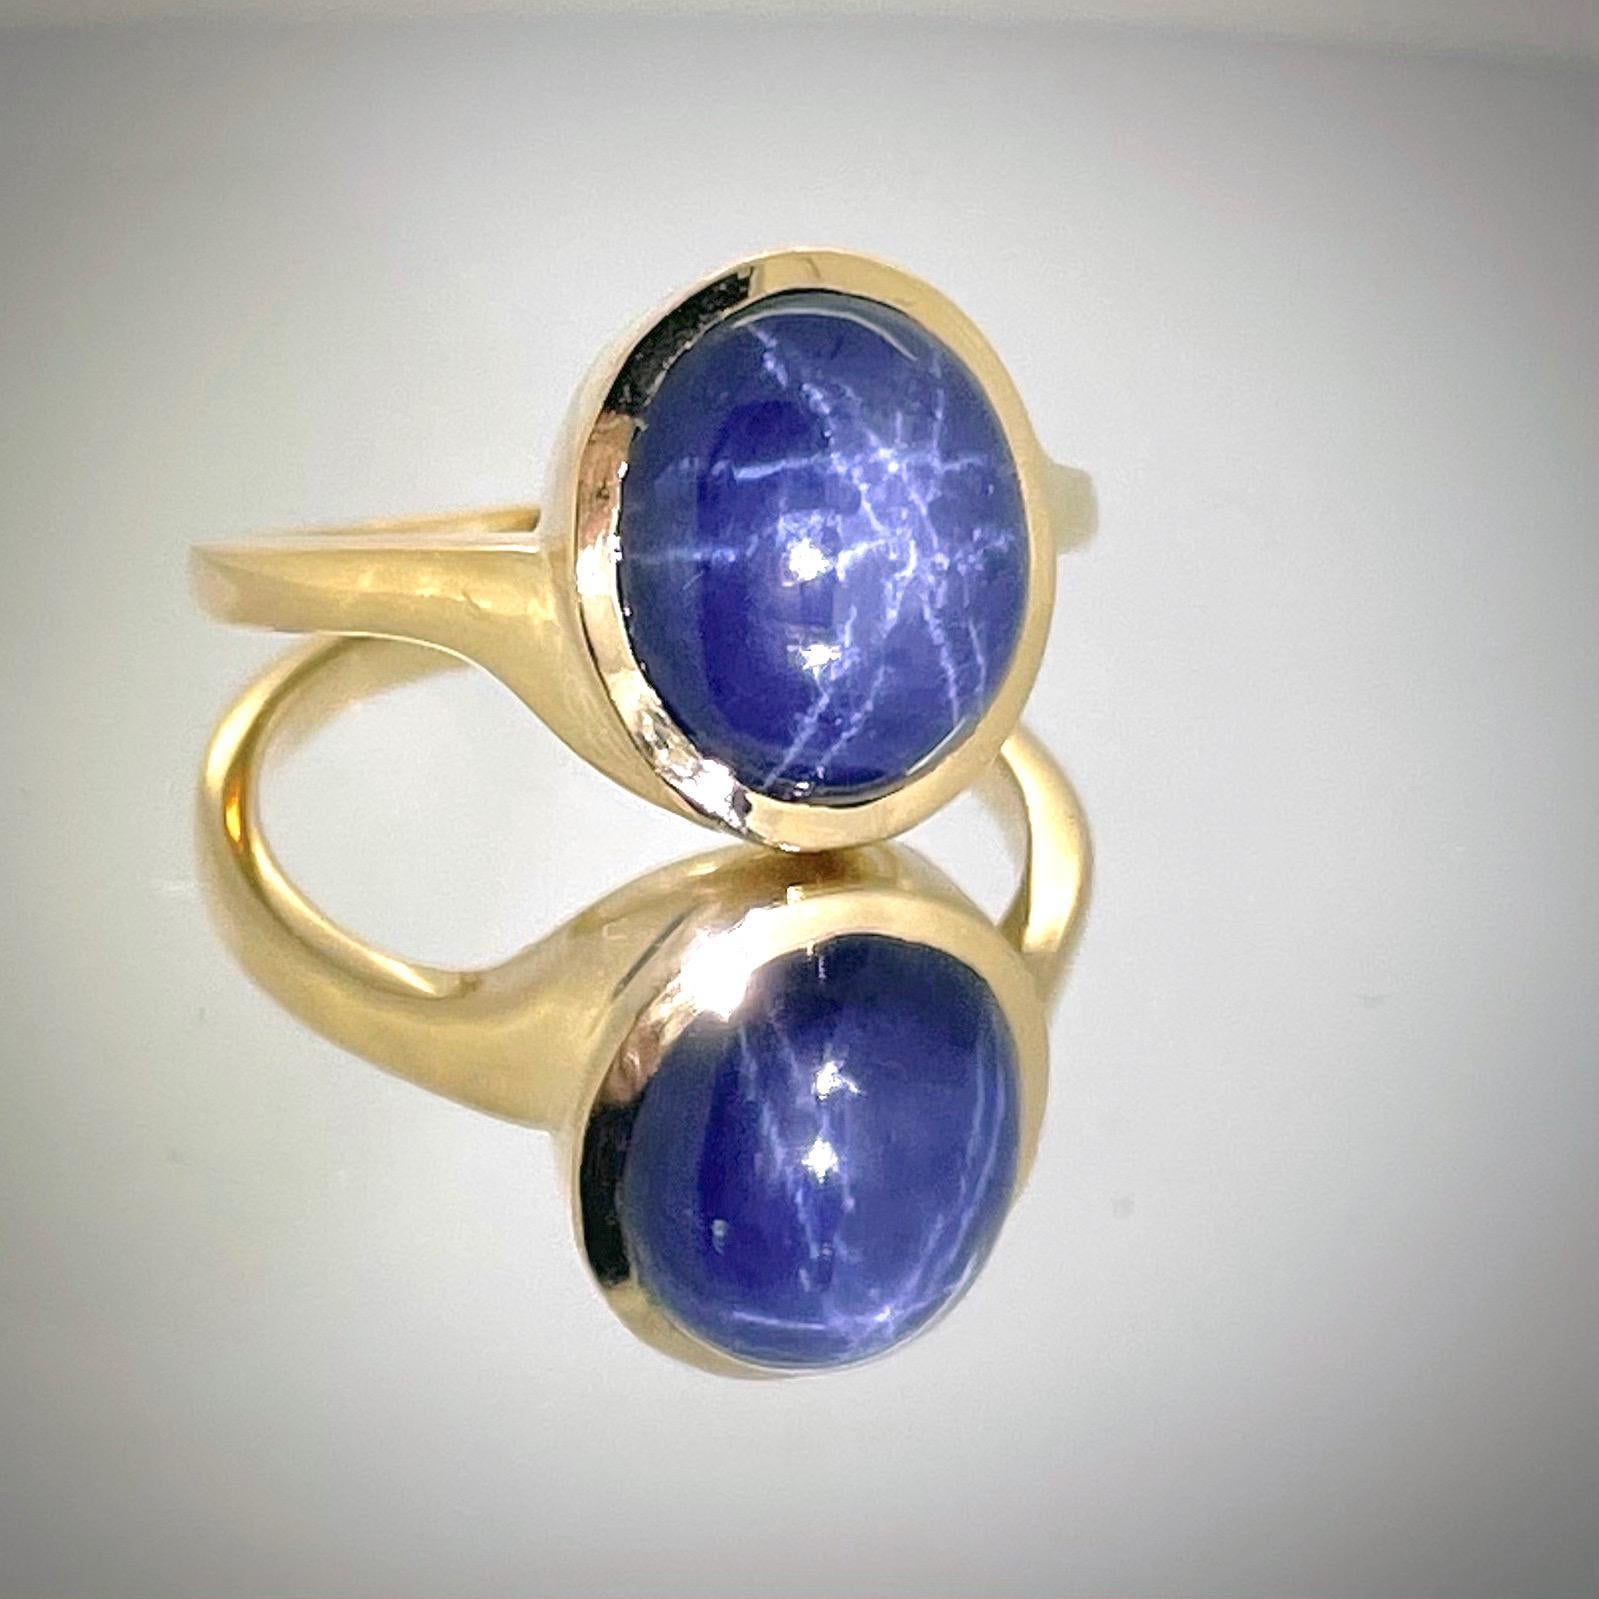 Cabochon 7.42ct Star Sapphire 18kt Yellow Gold Ring For Sale